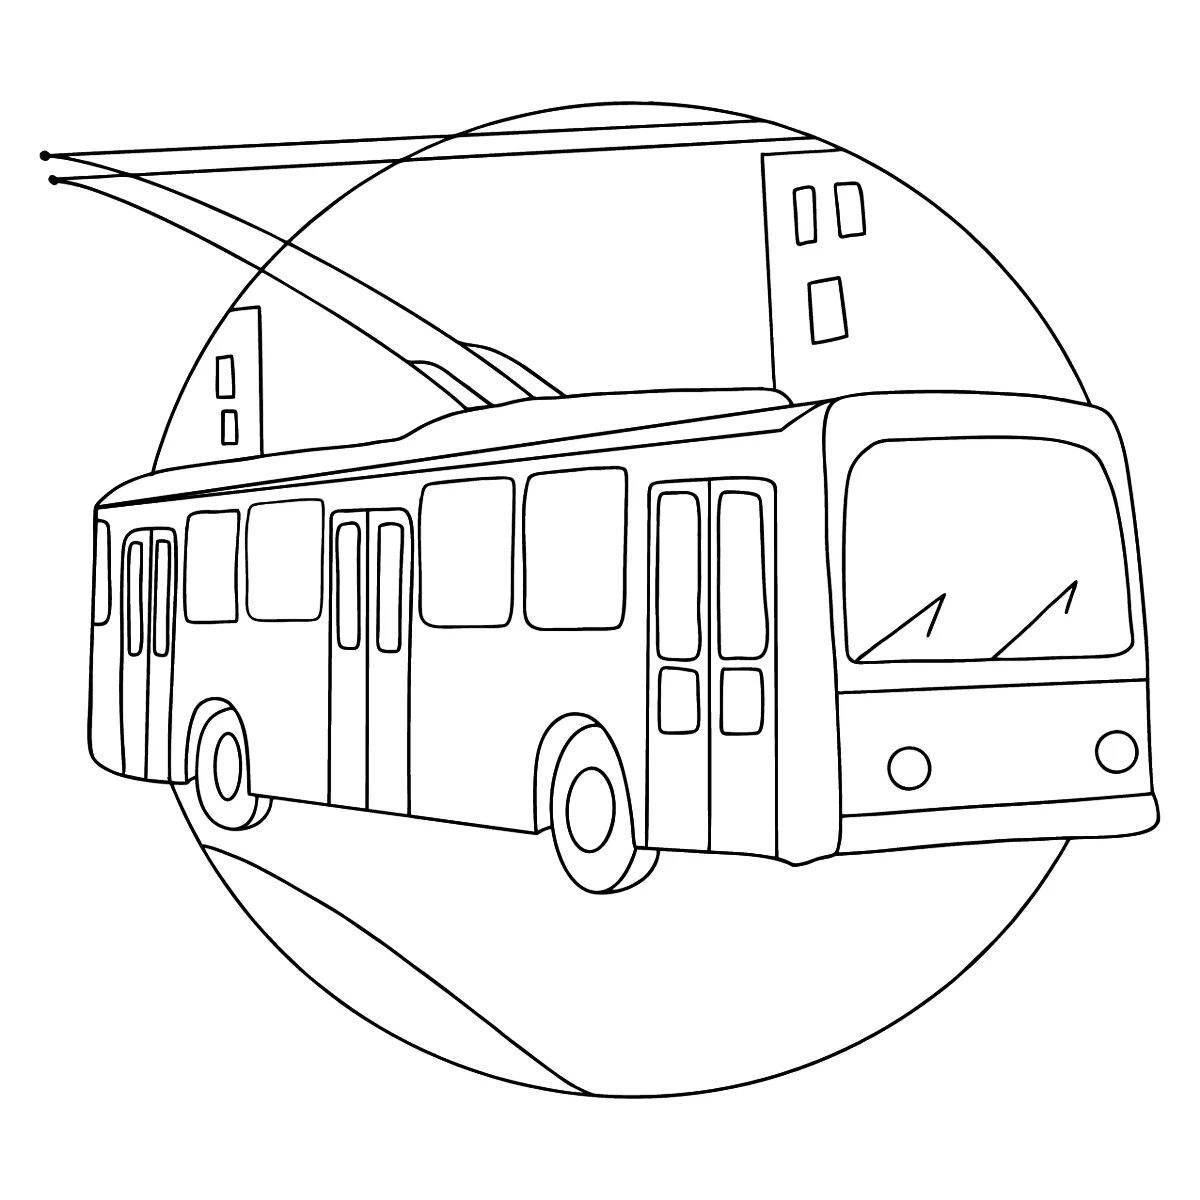 Incredible trolleybus coloring book for kids